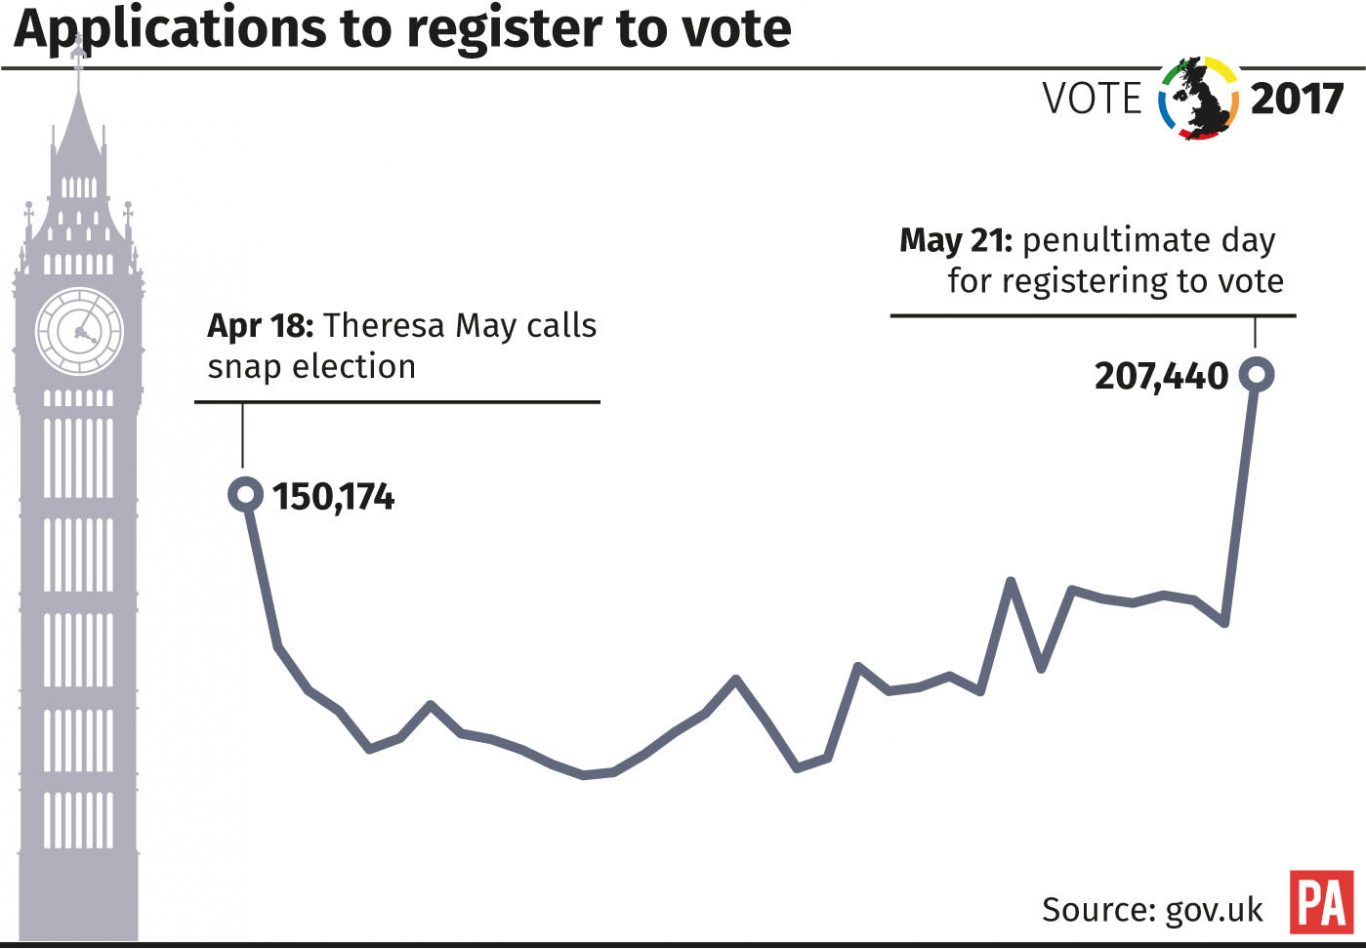 Applications to register to vote since Theresa May called the snap election graphic